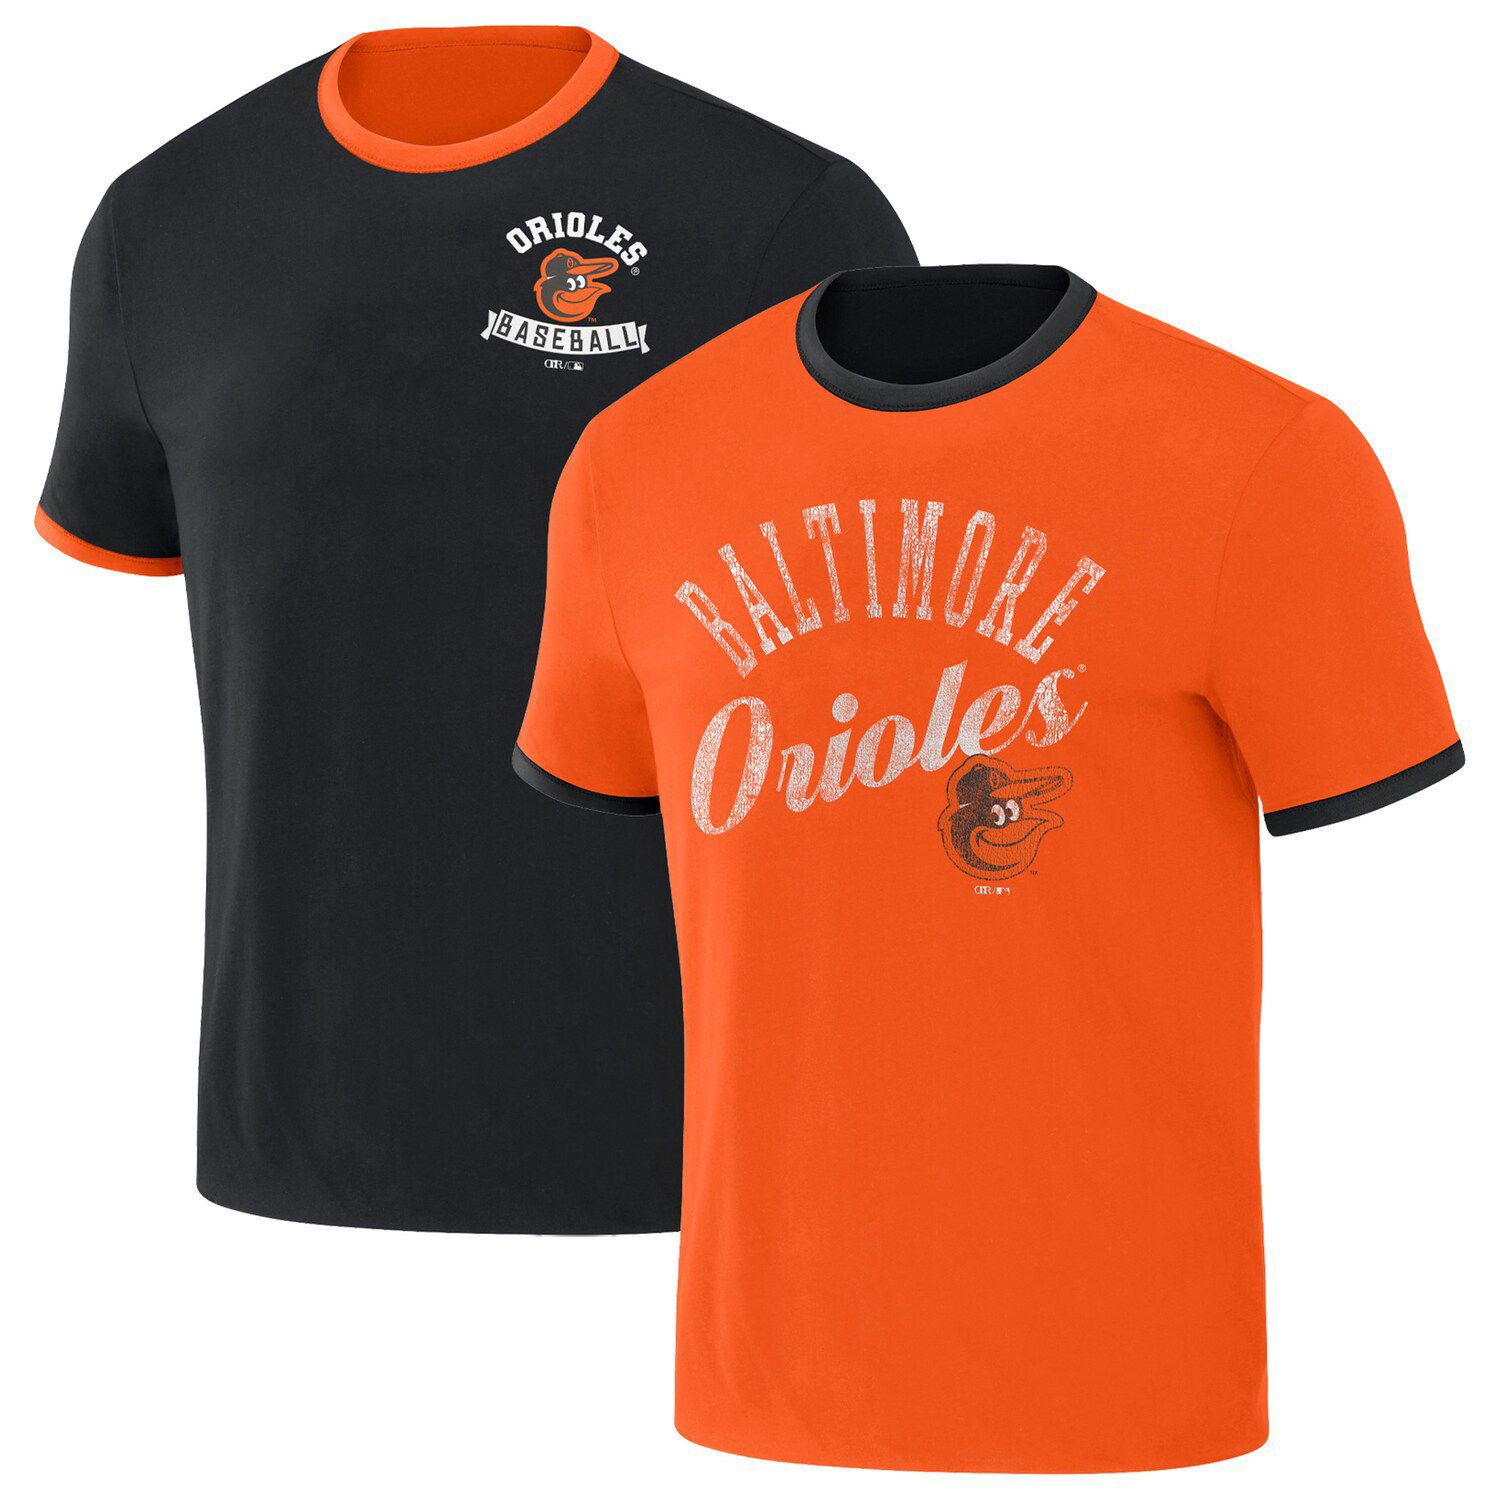 Baltimore Orioles Fanatics Branded Cooperstown Collection Forbes Team T-Shirt - Orange